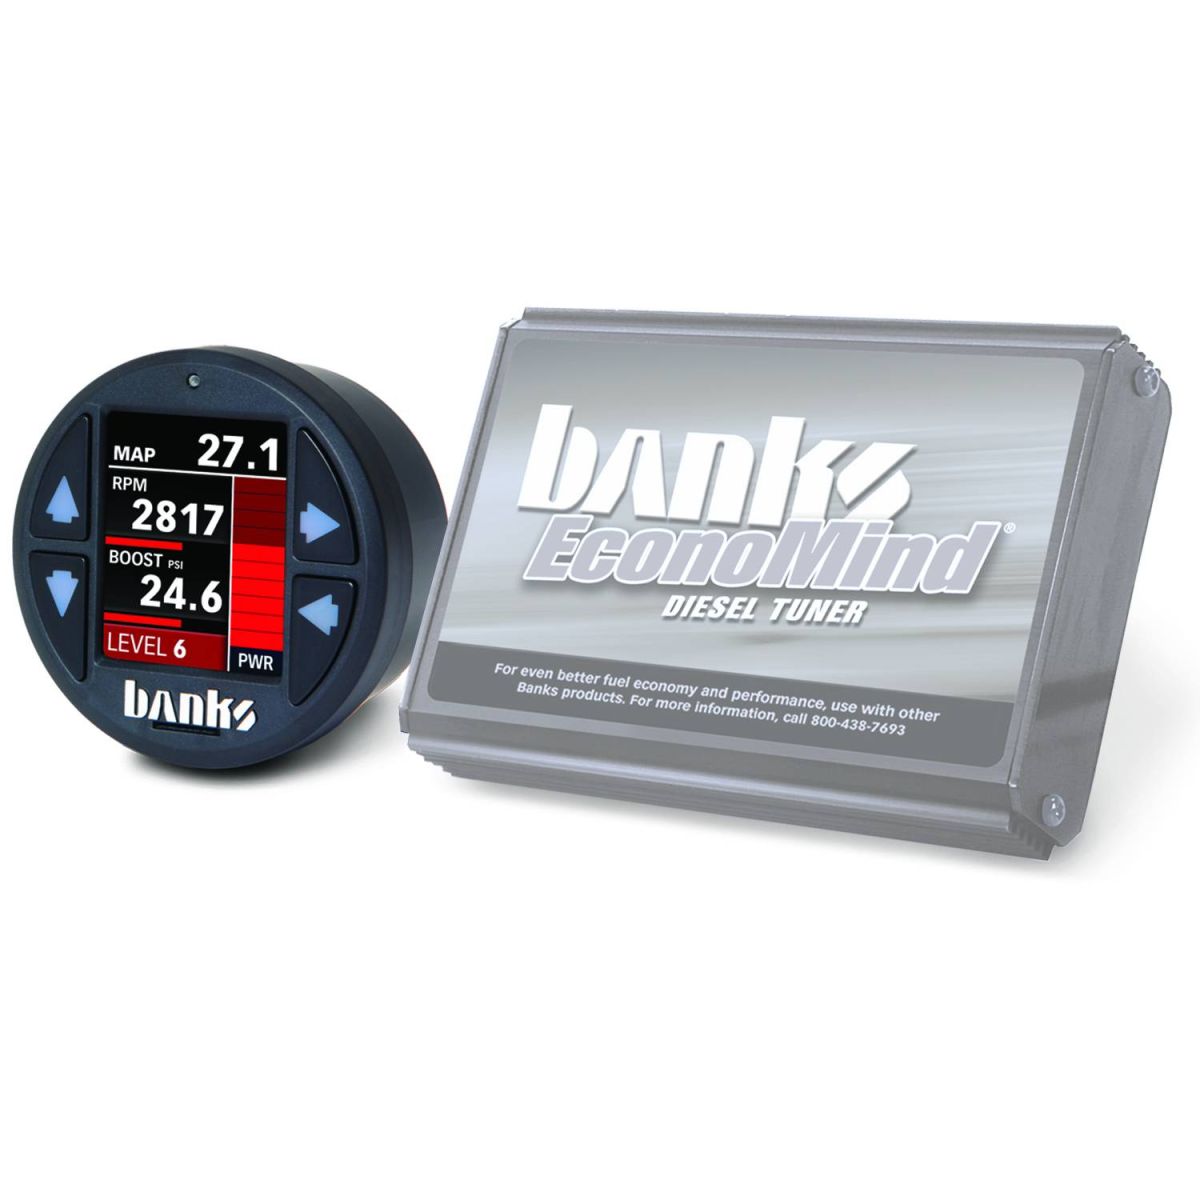 Banks Power - Banks Power Economind Diesel Tuner (PowerPack calibration) with Banks iDash 1.8 Super Gauge for use with 2003-2005 Dodge 5.9L